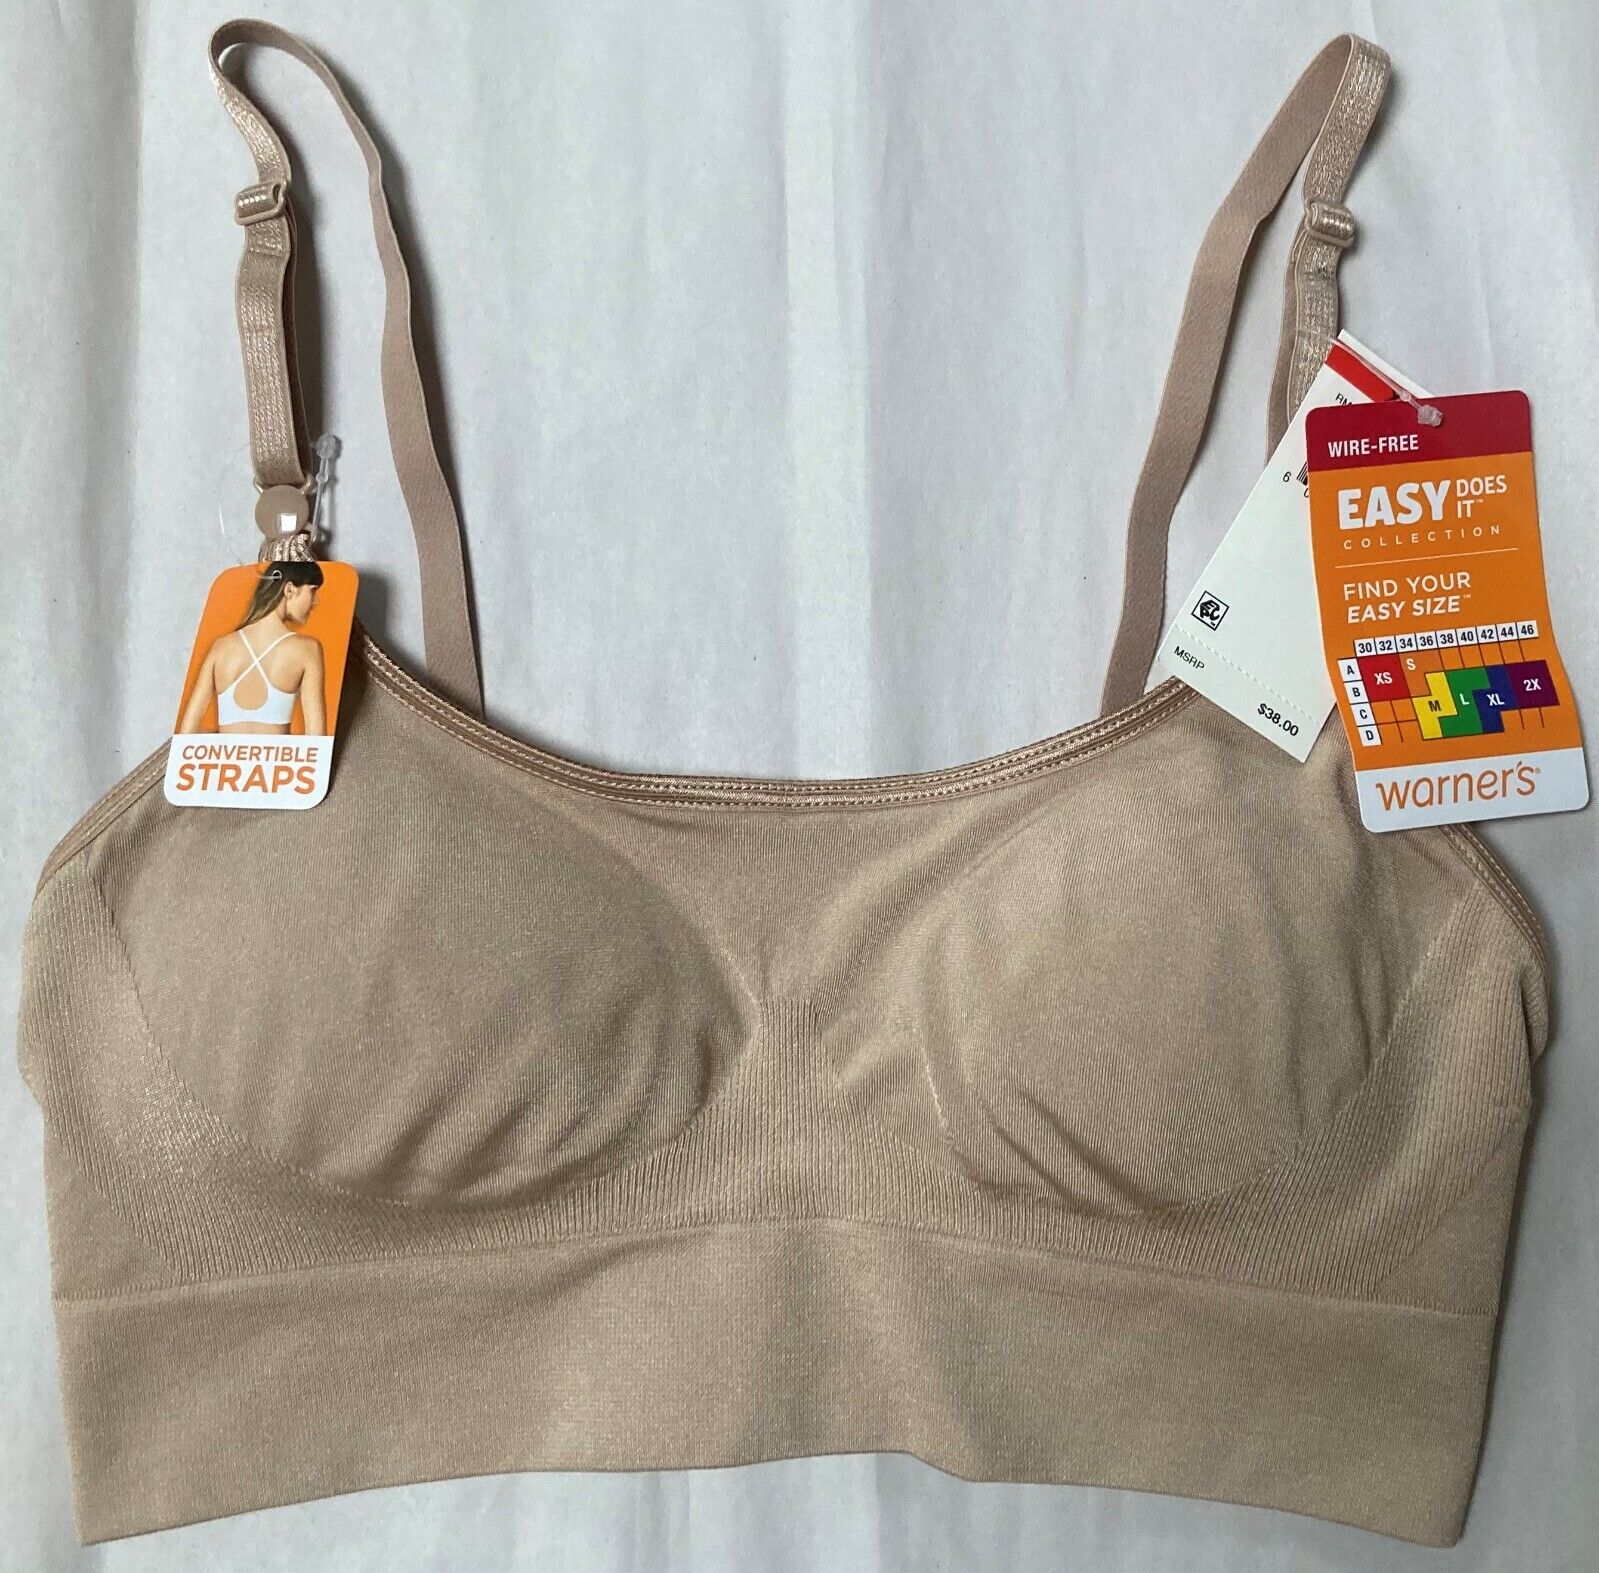 NWT WARNER'S EASY DOES IT W/F NUDE CONVERTIBLE STRAPS BRA RM0911A